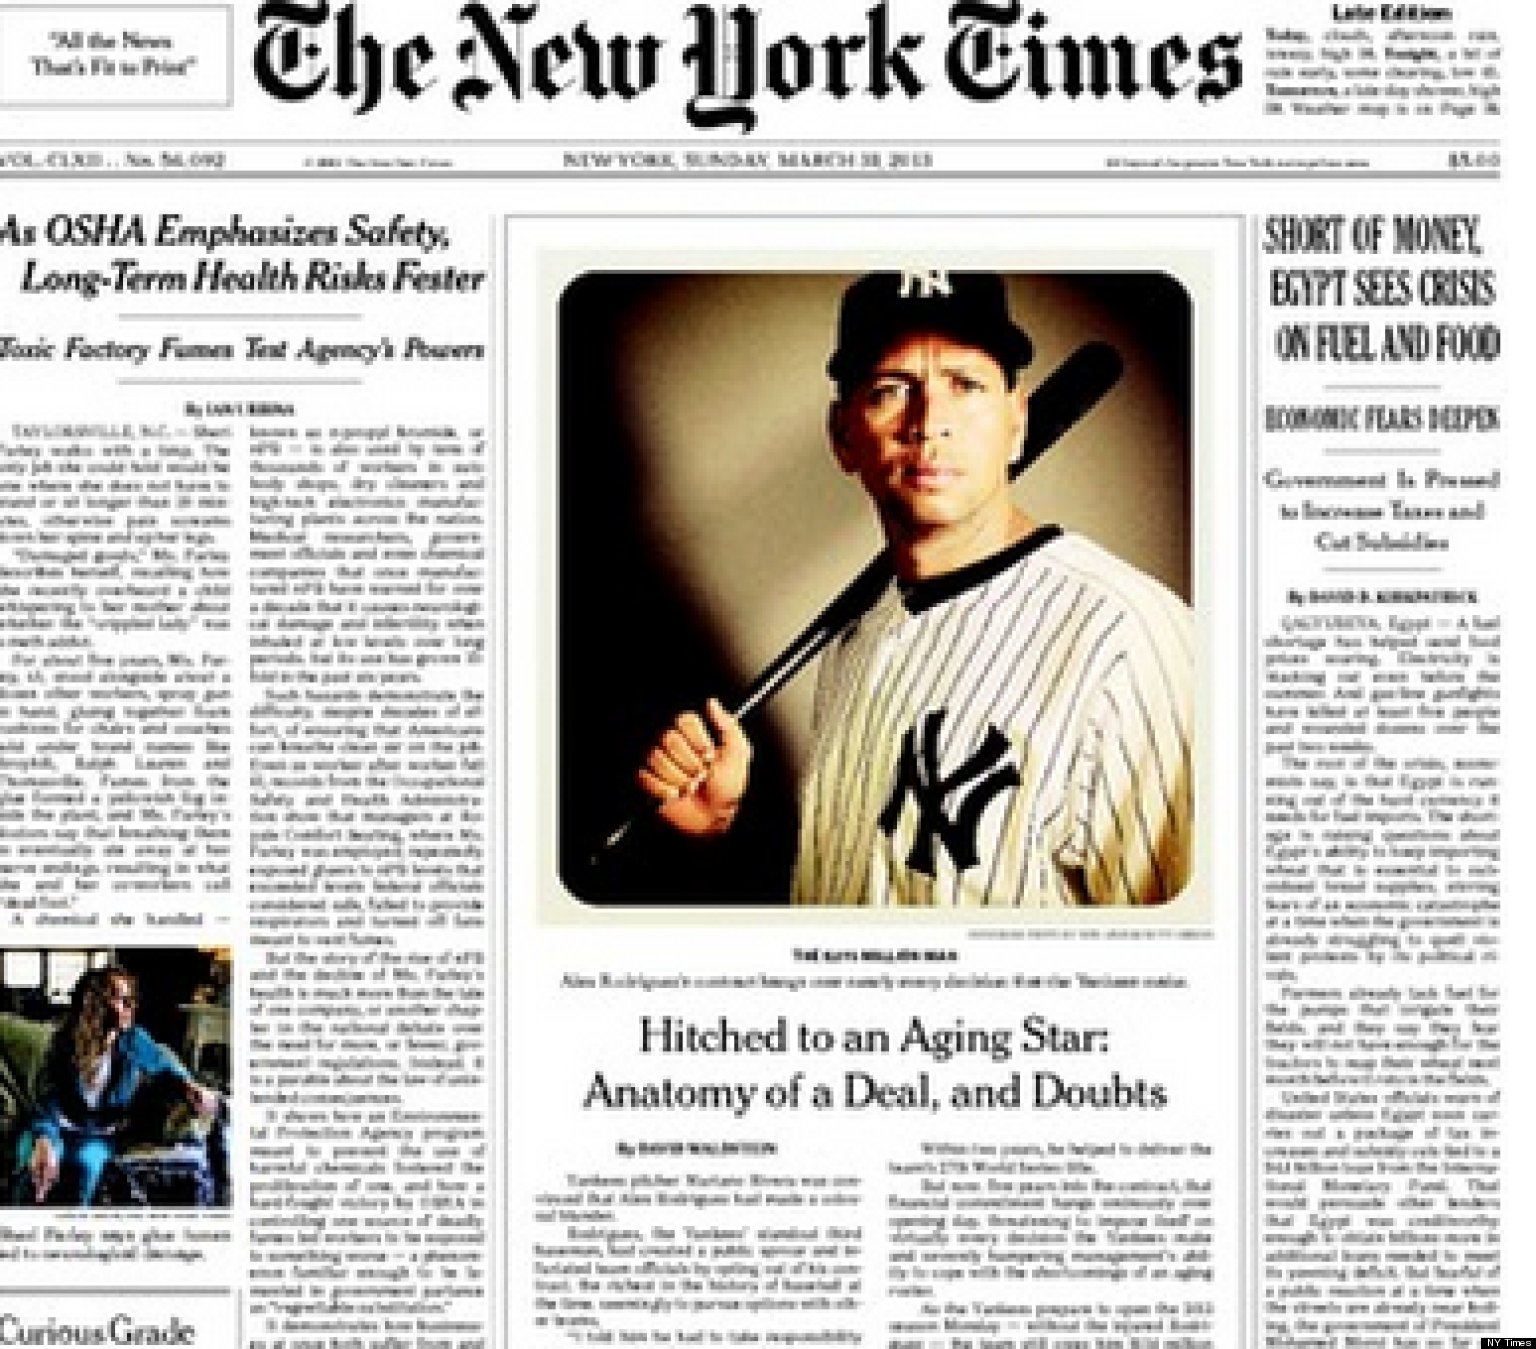 NY Times Runs Instagram Photo On Front Page (PHOTO)